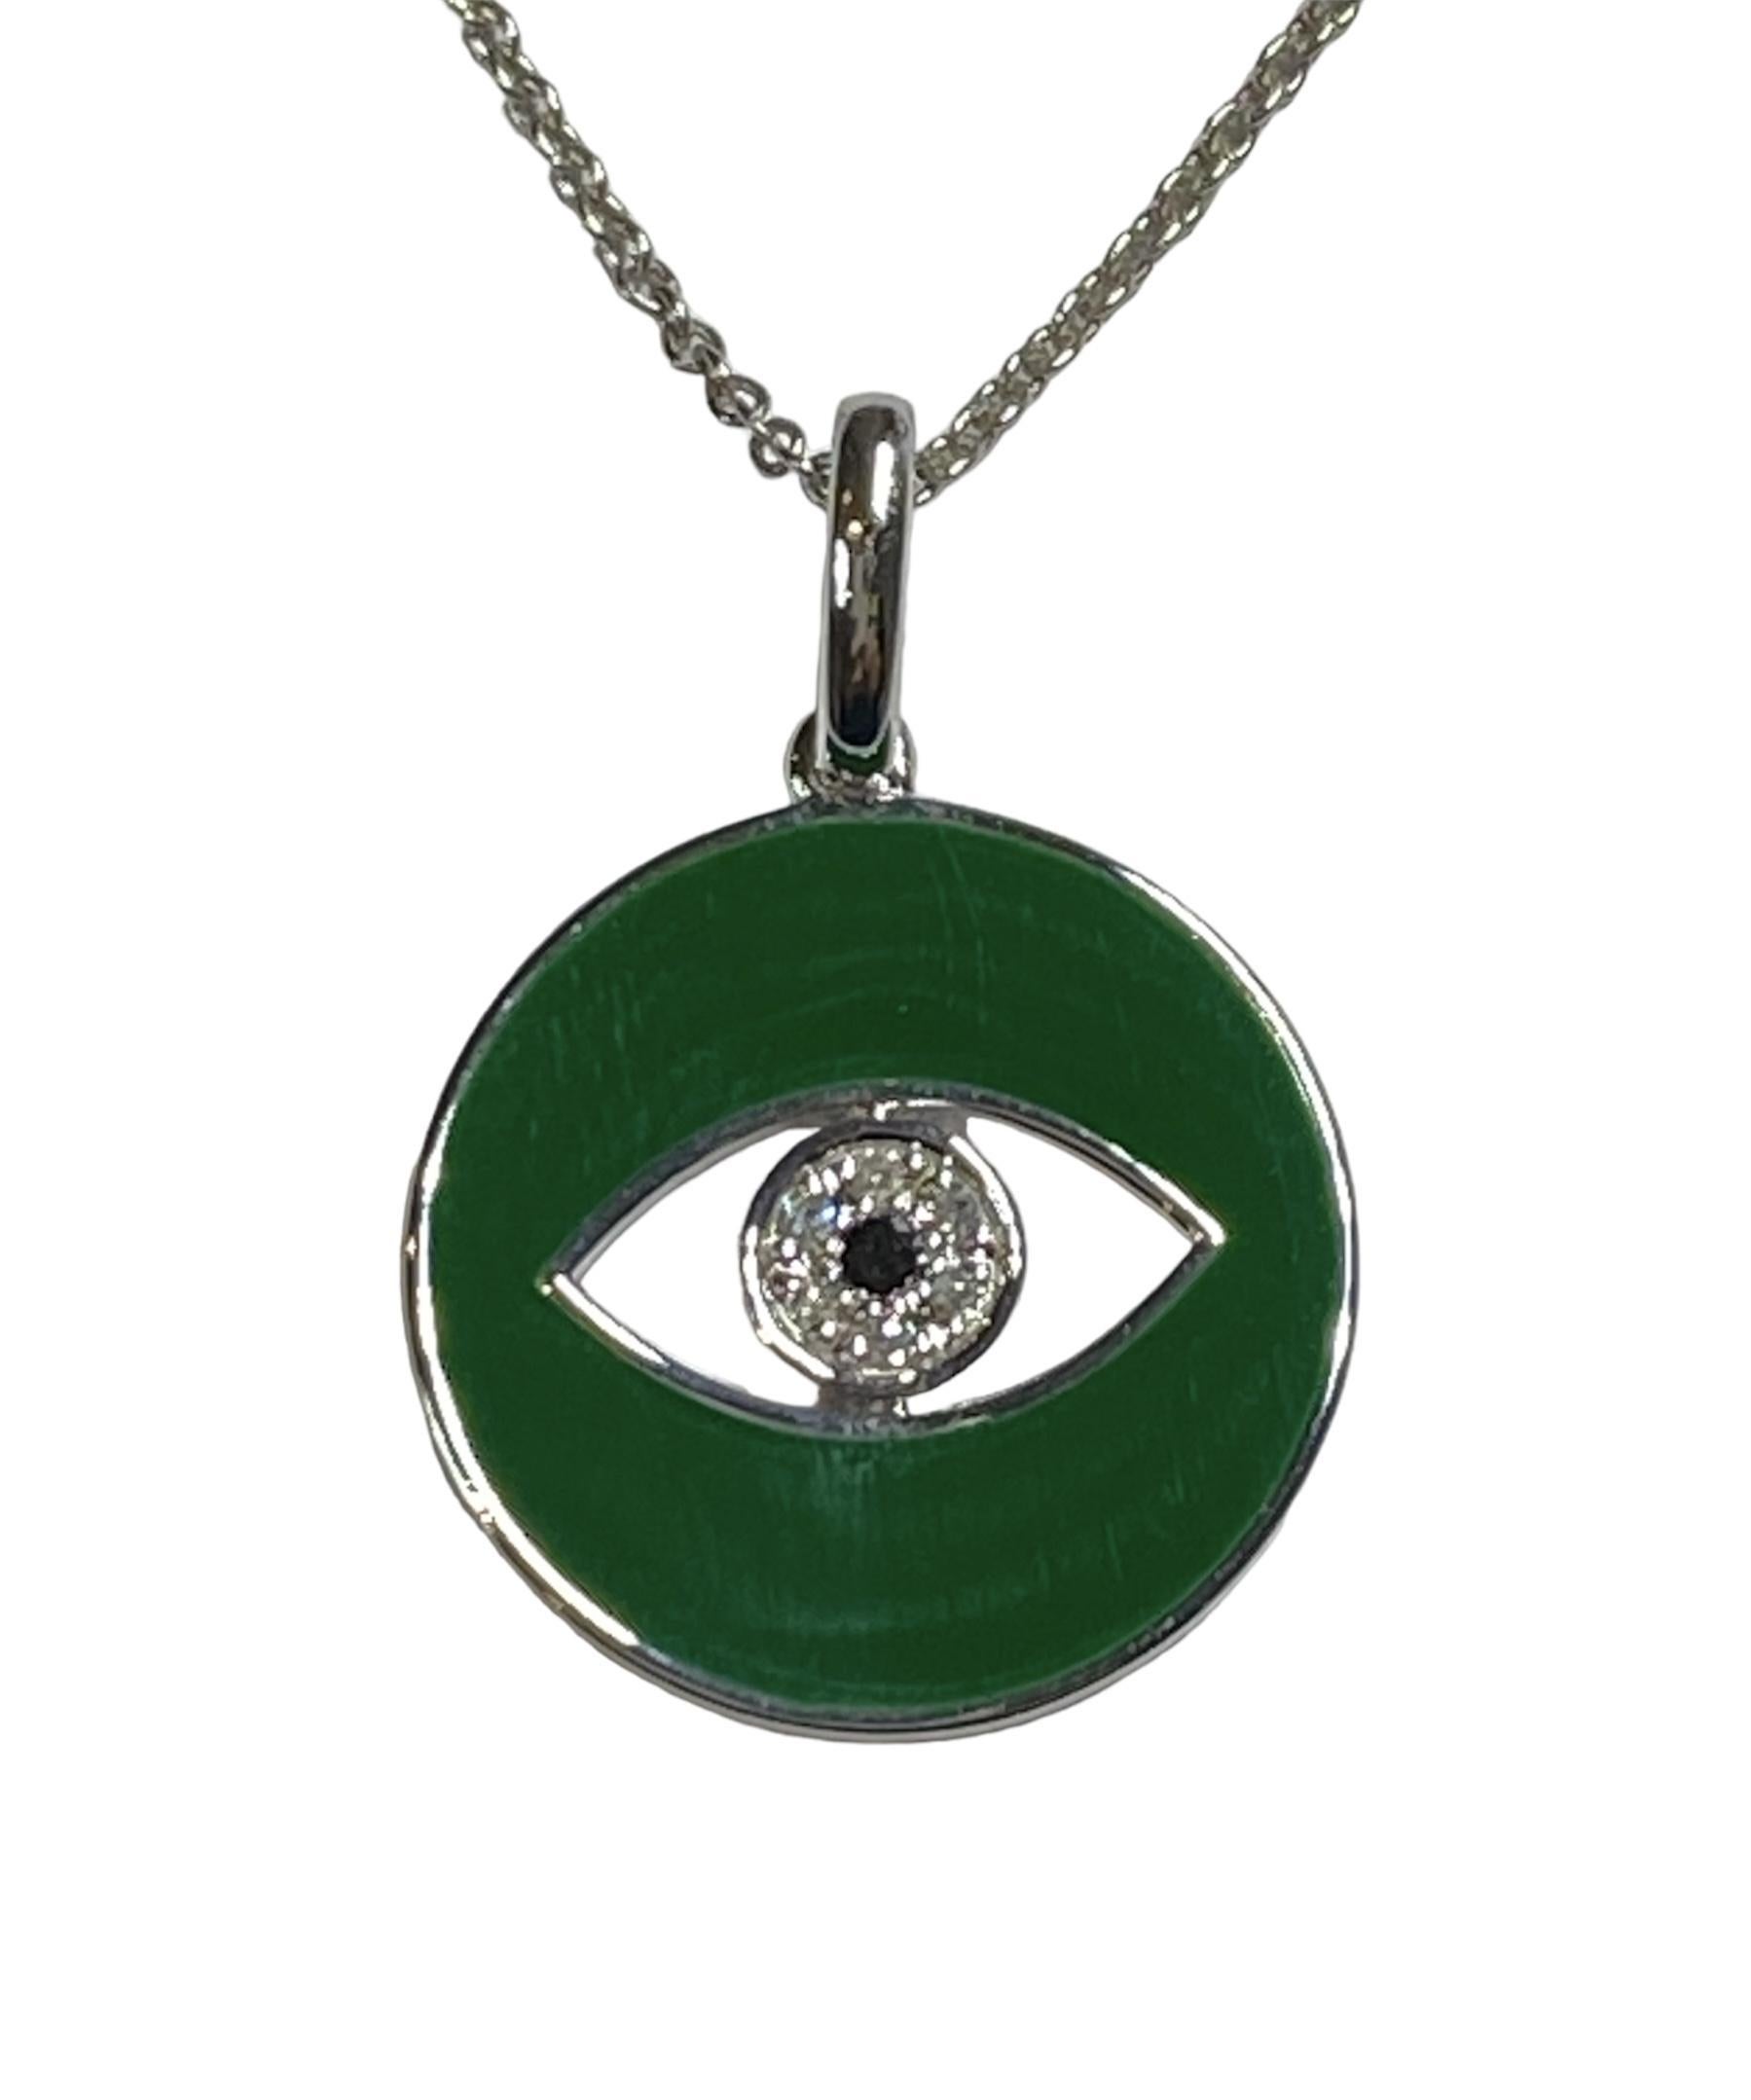 Solid 14K White Gold Evil Eye Diamond Necklace 
Fall in love with this Hunter Green Enamel Evil Eye high-polish pendant with natural diamonds.
The Evil Eye is an symbol of spiritual protection and good health. 

14K White Gold 


Green Enamel 
0.05